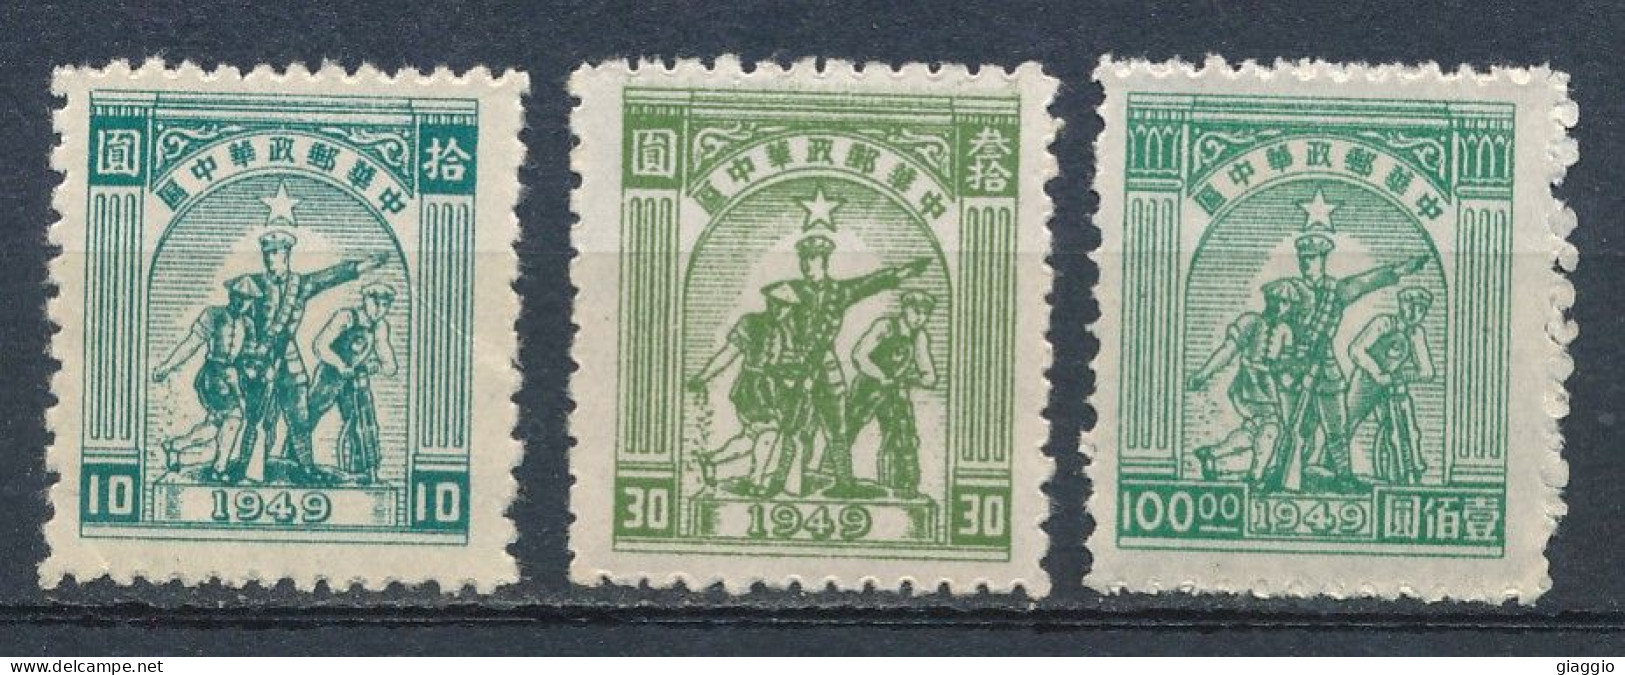 °°° LOT CINA CHINA CENTRALE - Y&T N°65/67/74 - 1949 °°° - Zentralchina 1948-49